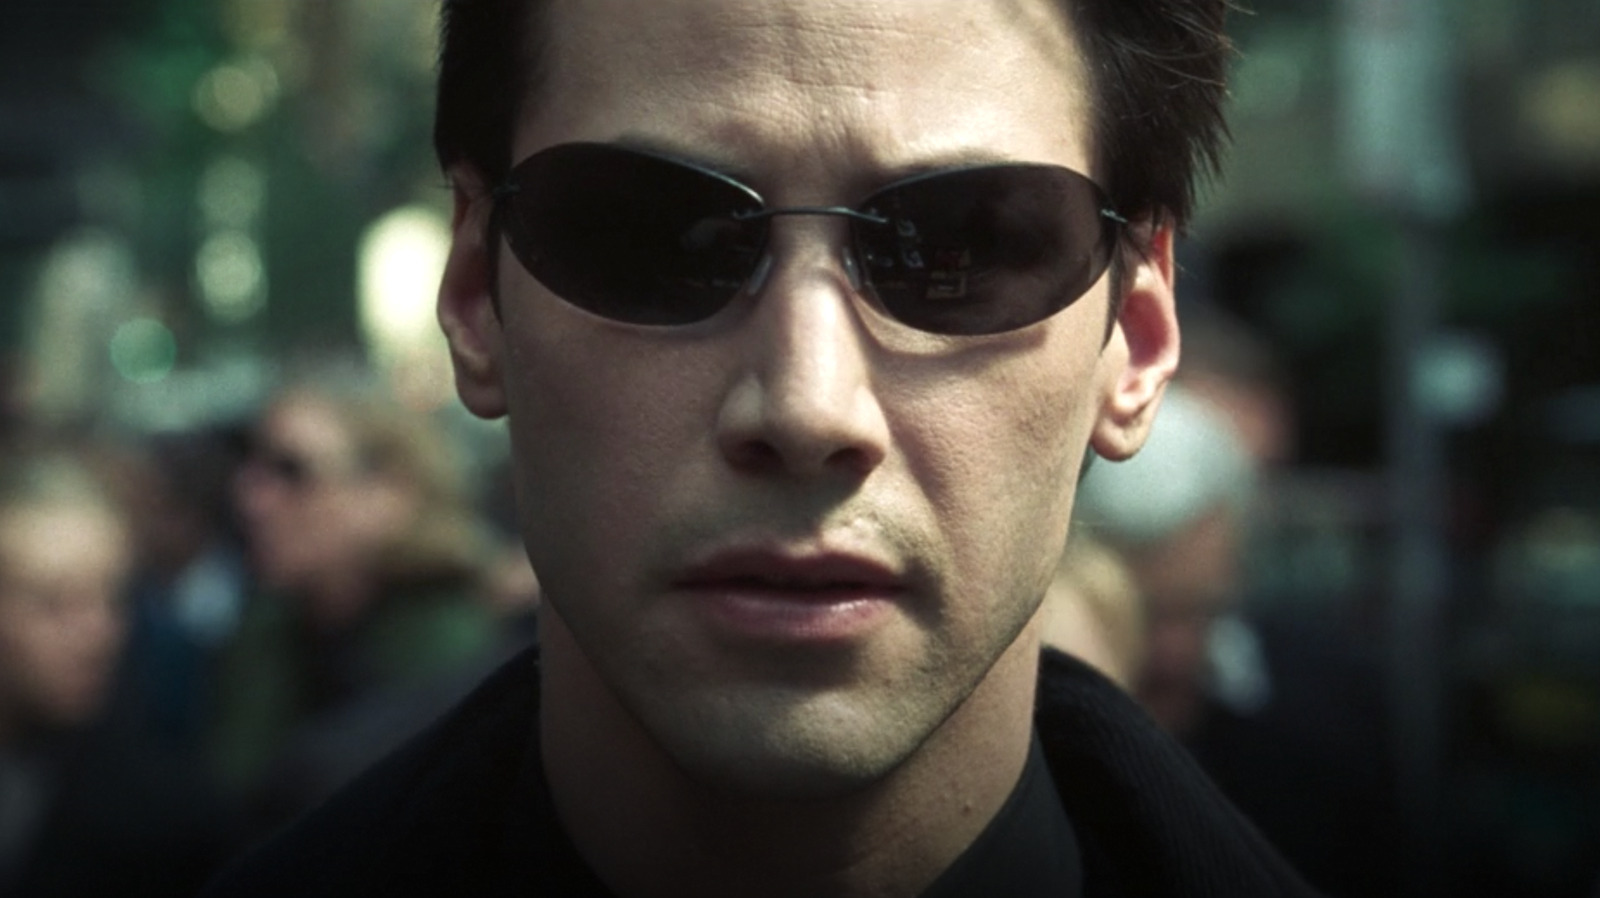 The Most Paused Neo Scene From The Matrix